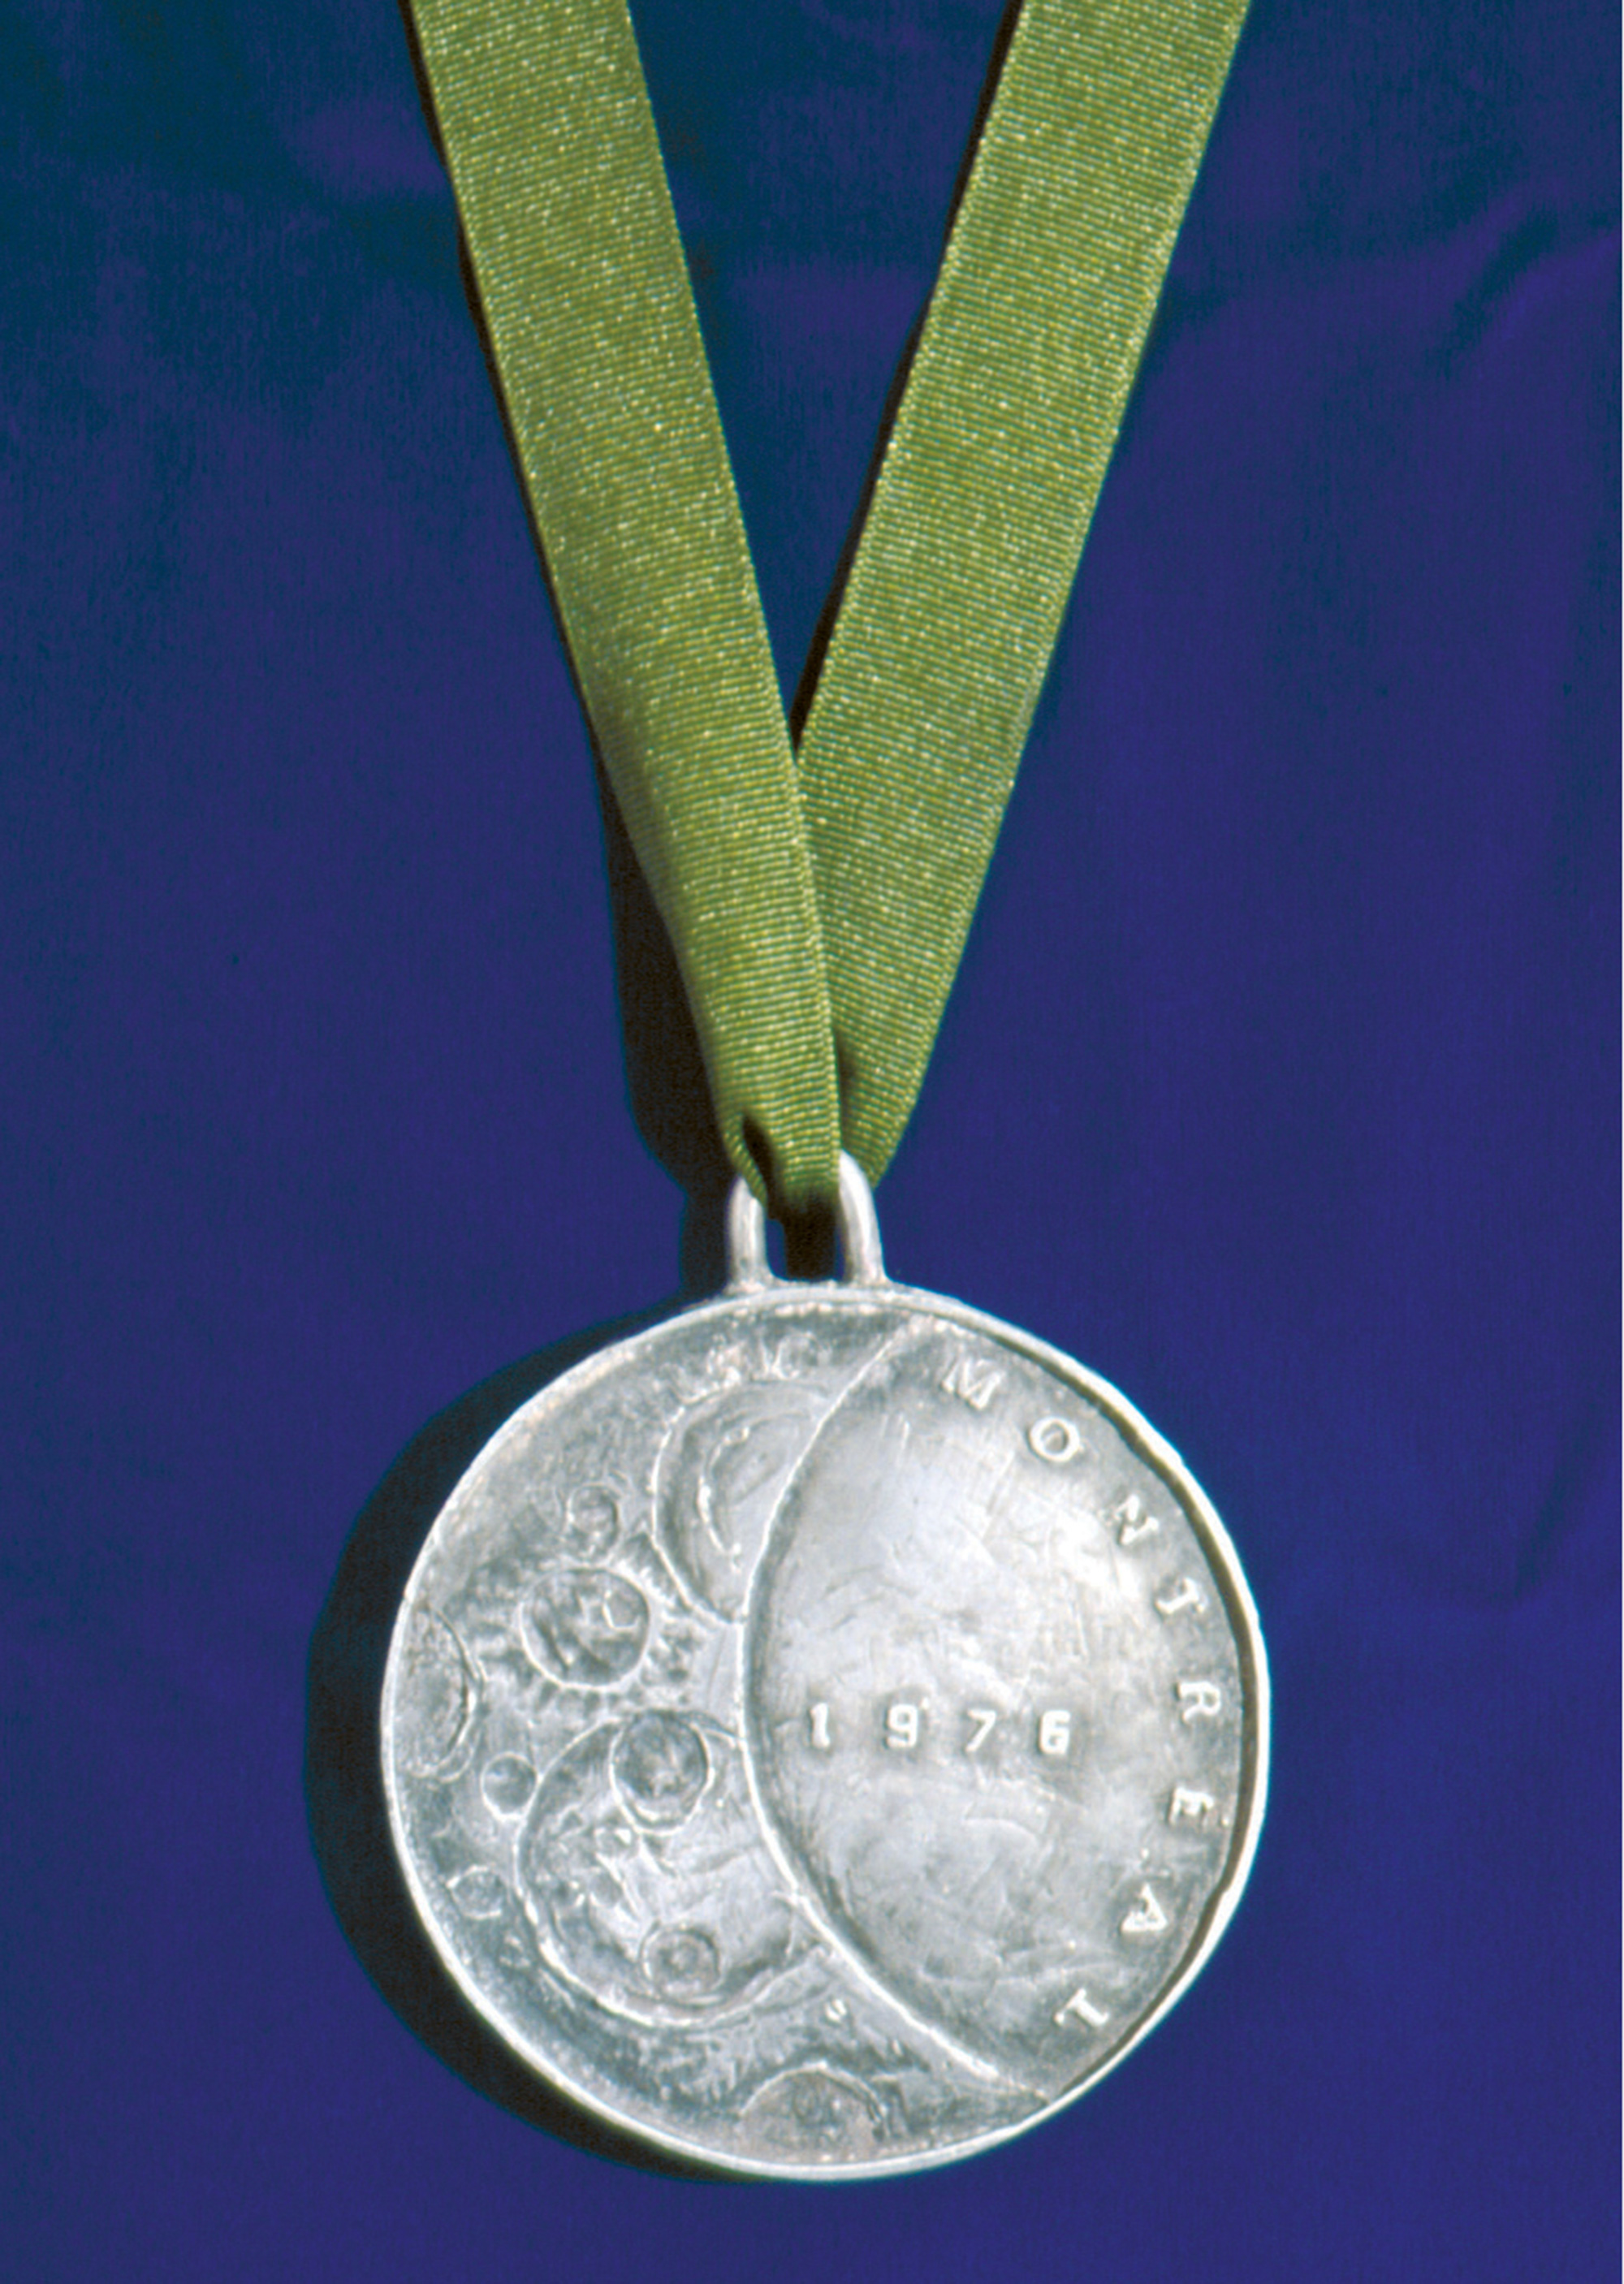 A photograph of the back of the medal.